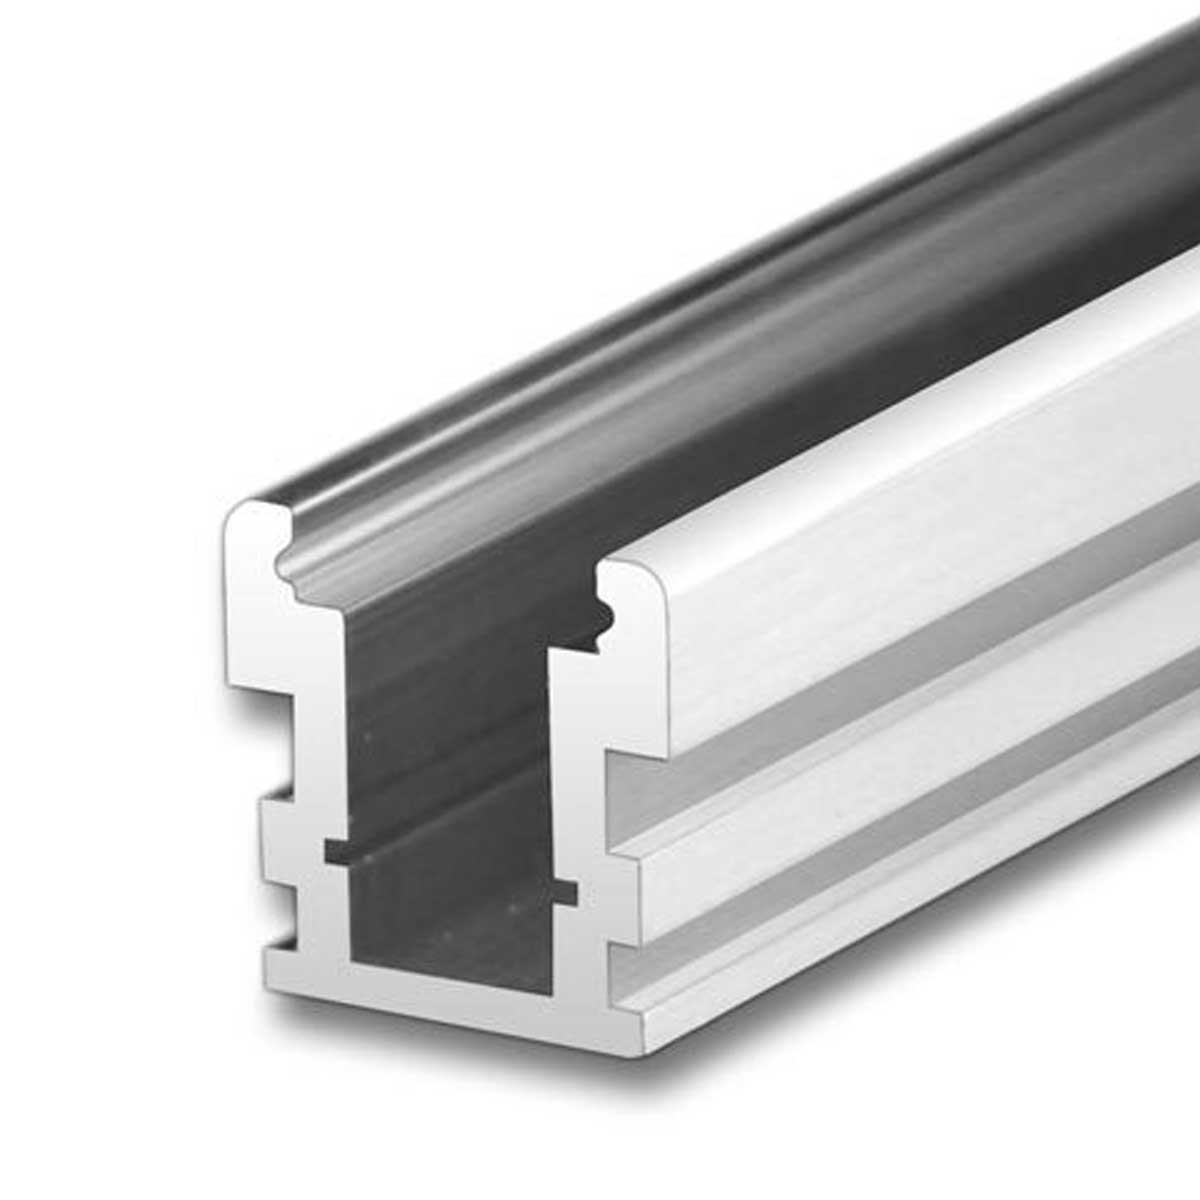 1000 Aluminium Slotted Channel Manufacturers, Suppliers in Sirmaur